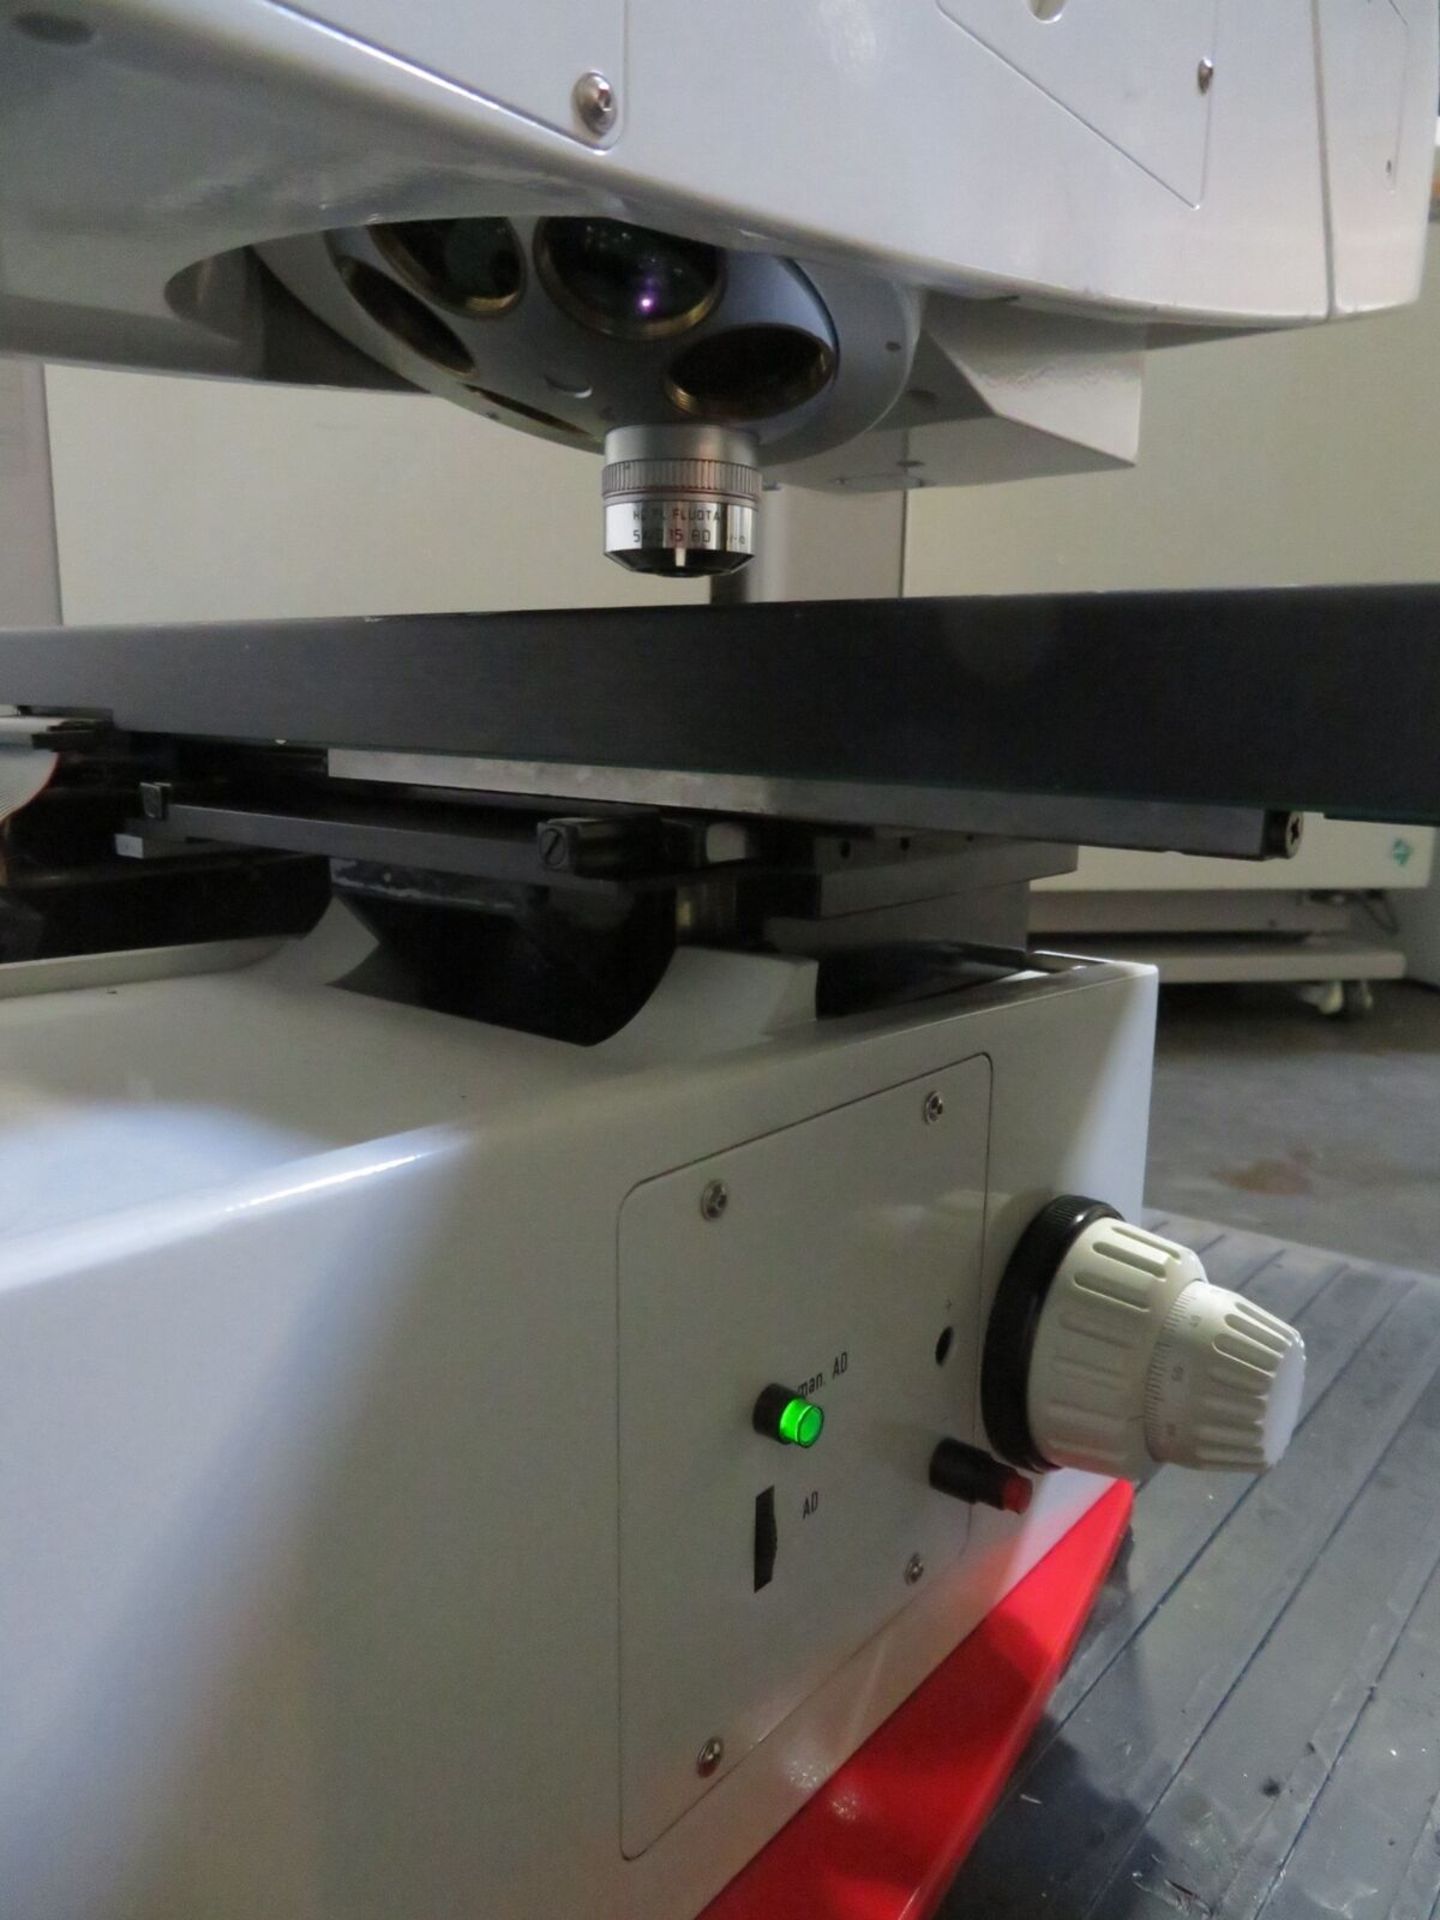 Leica INM100 Inspection Microscope w/Brooks UltraStation XT Wafer Loader - Gilroy - Image 8 of 13